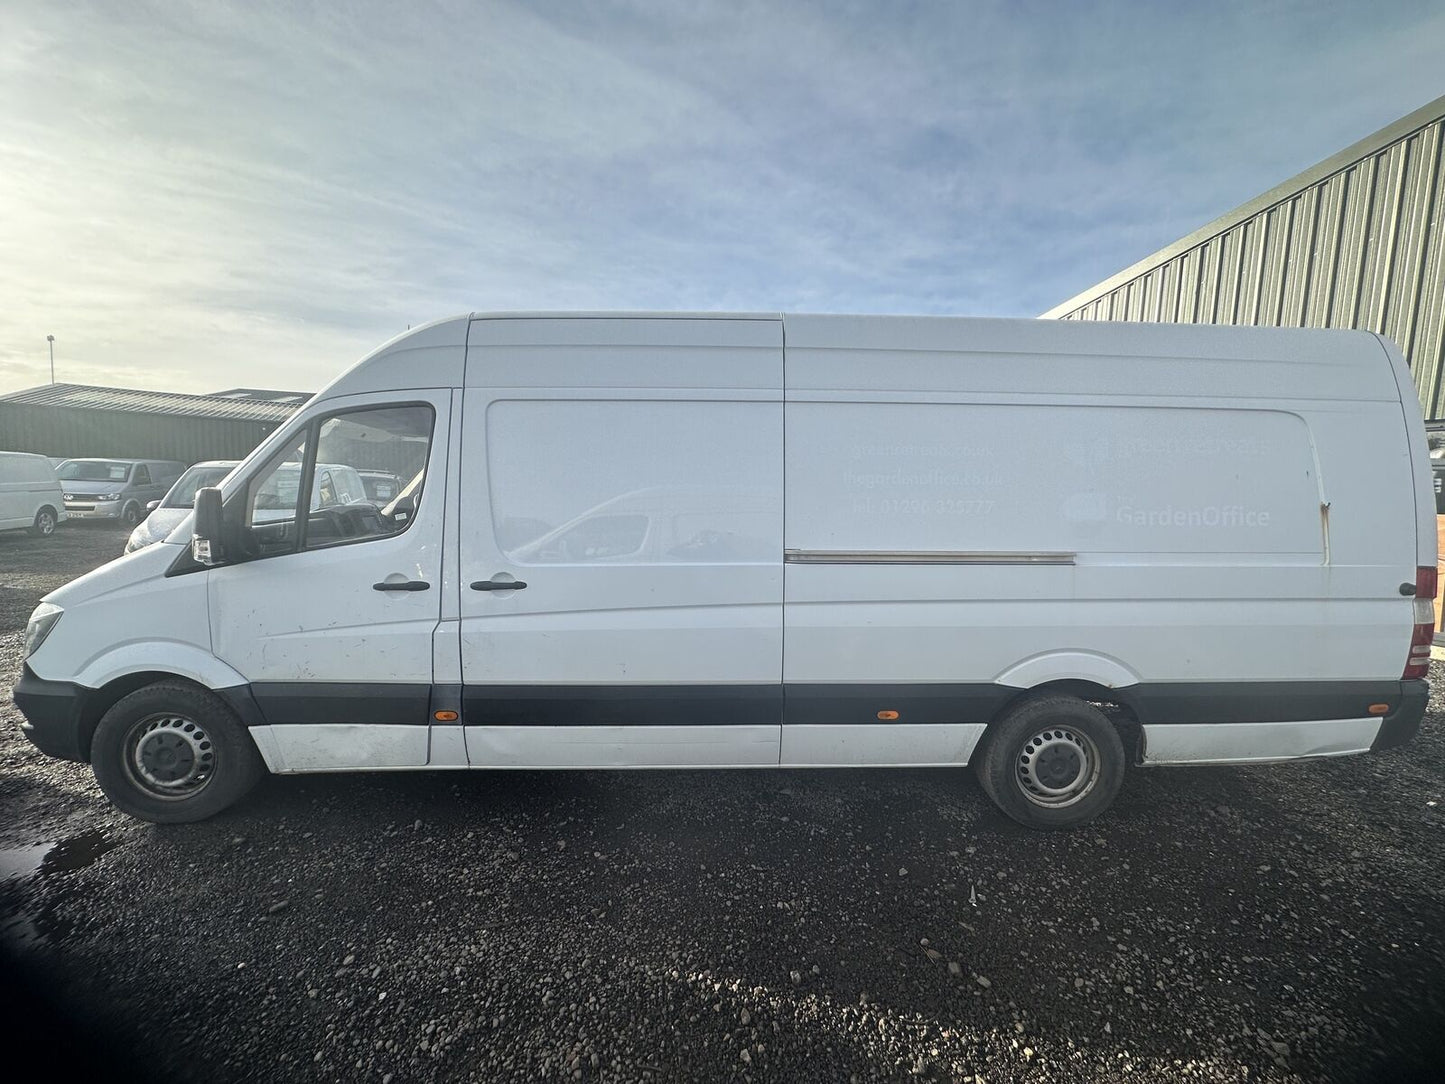 Bid on 2017 MERCEDES SPRINTER 314 CDI LWB: RELIABLE 1-OWNER VAN - MOT JULY 2024- Buy &amp; Sell on Auction with EAMA Group